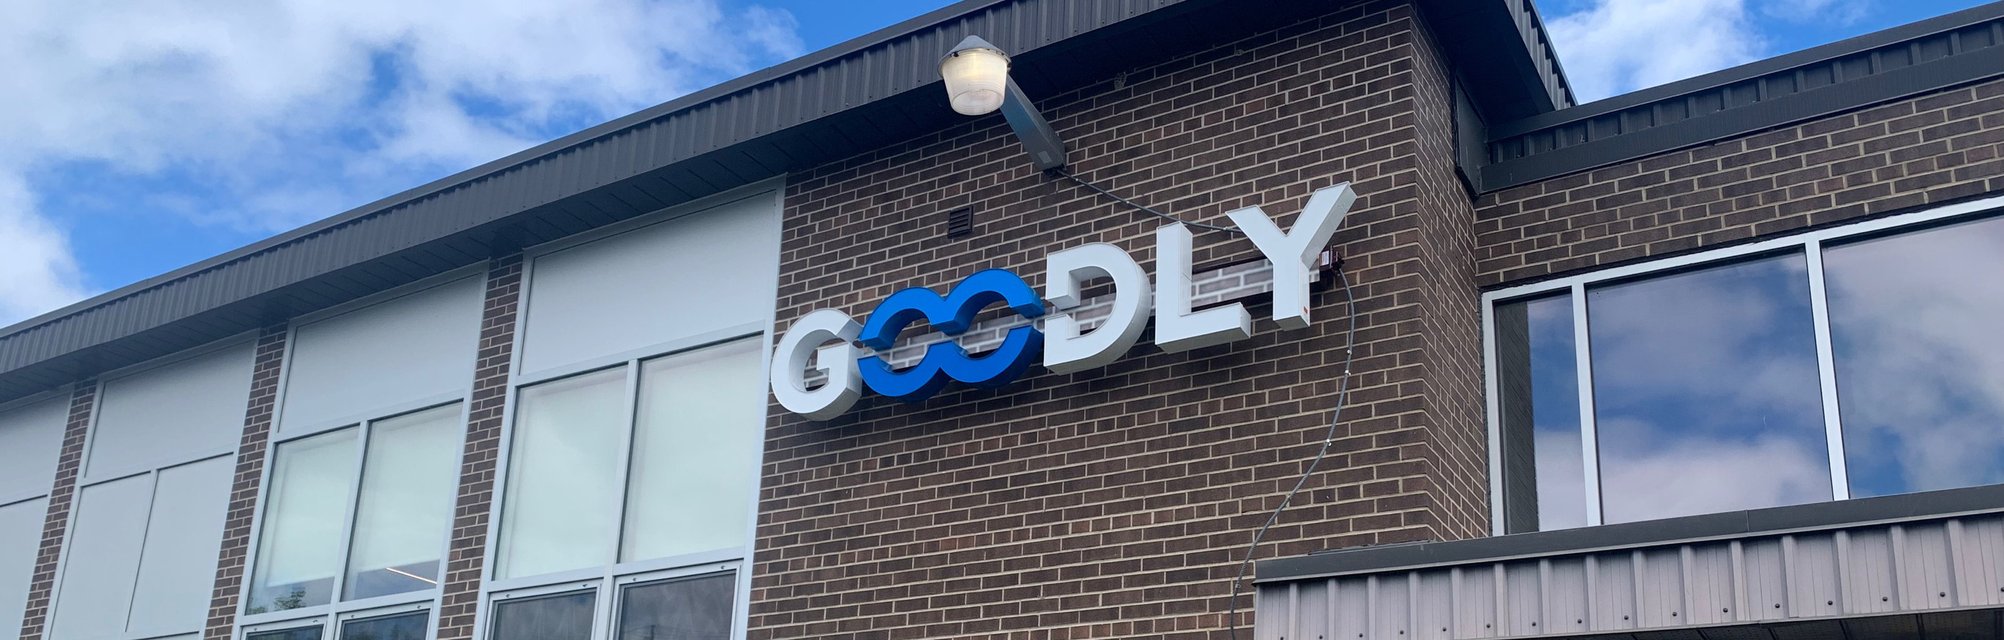 Featured Image: Hardware Lifecycle Management - Goodly Cloud Headquarters - Read full post: Goodly Cloud CEO to speak at Digital Transformation Event on September 15th